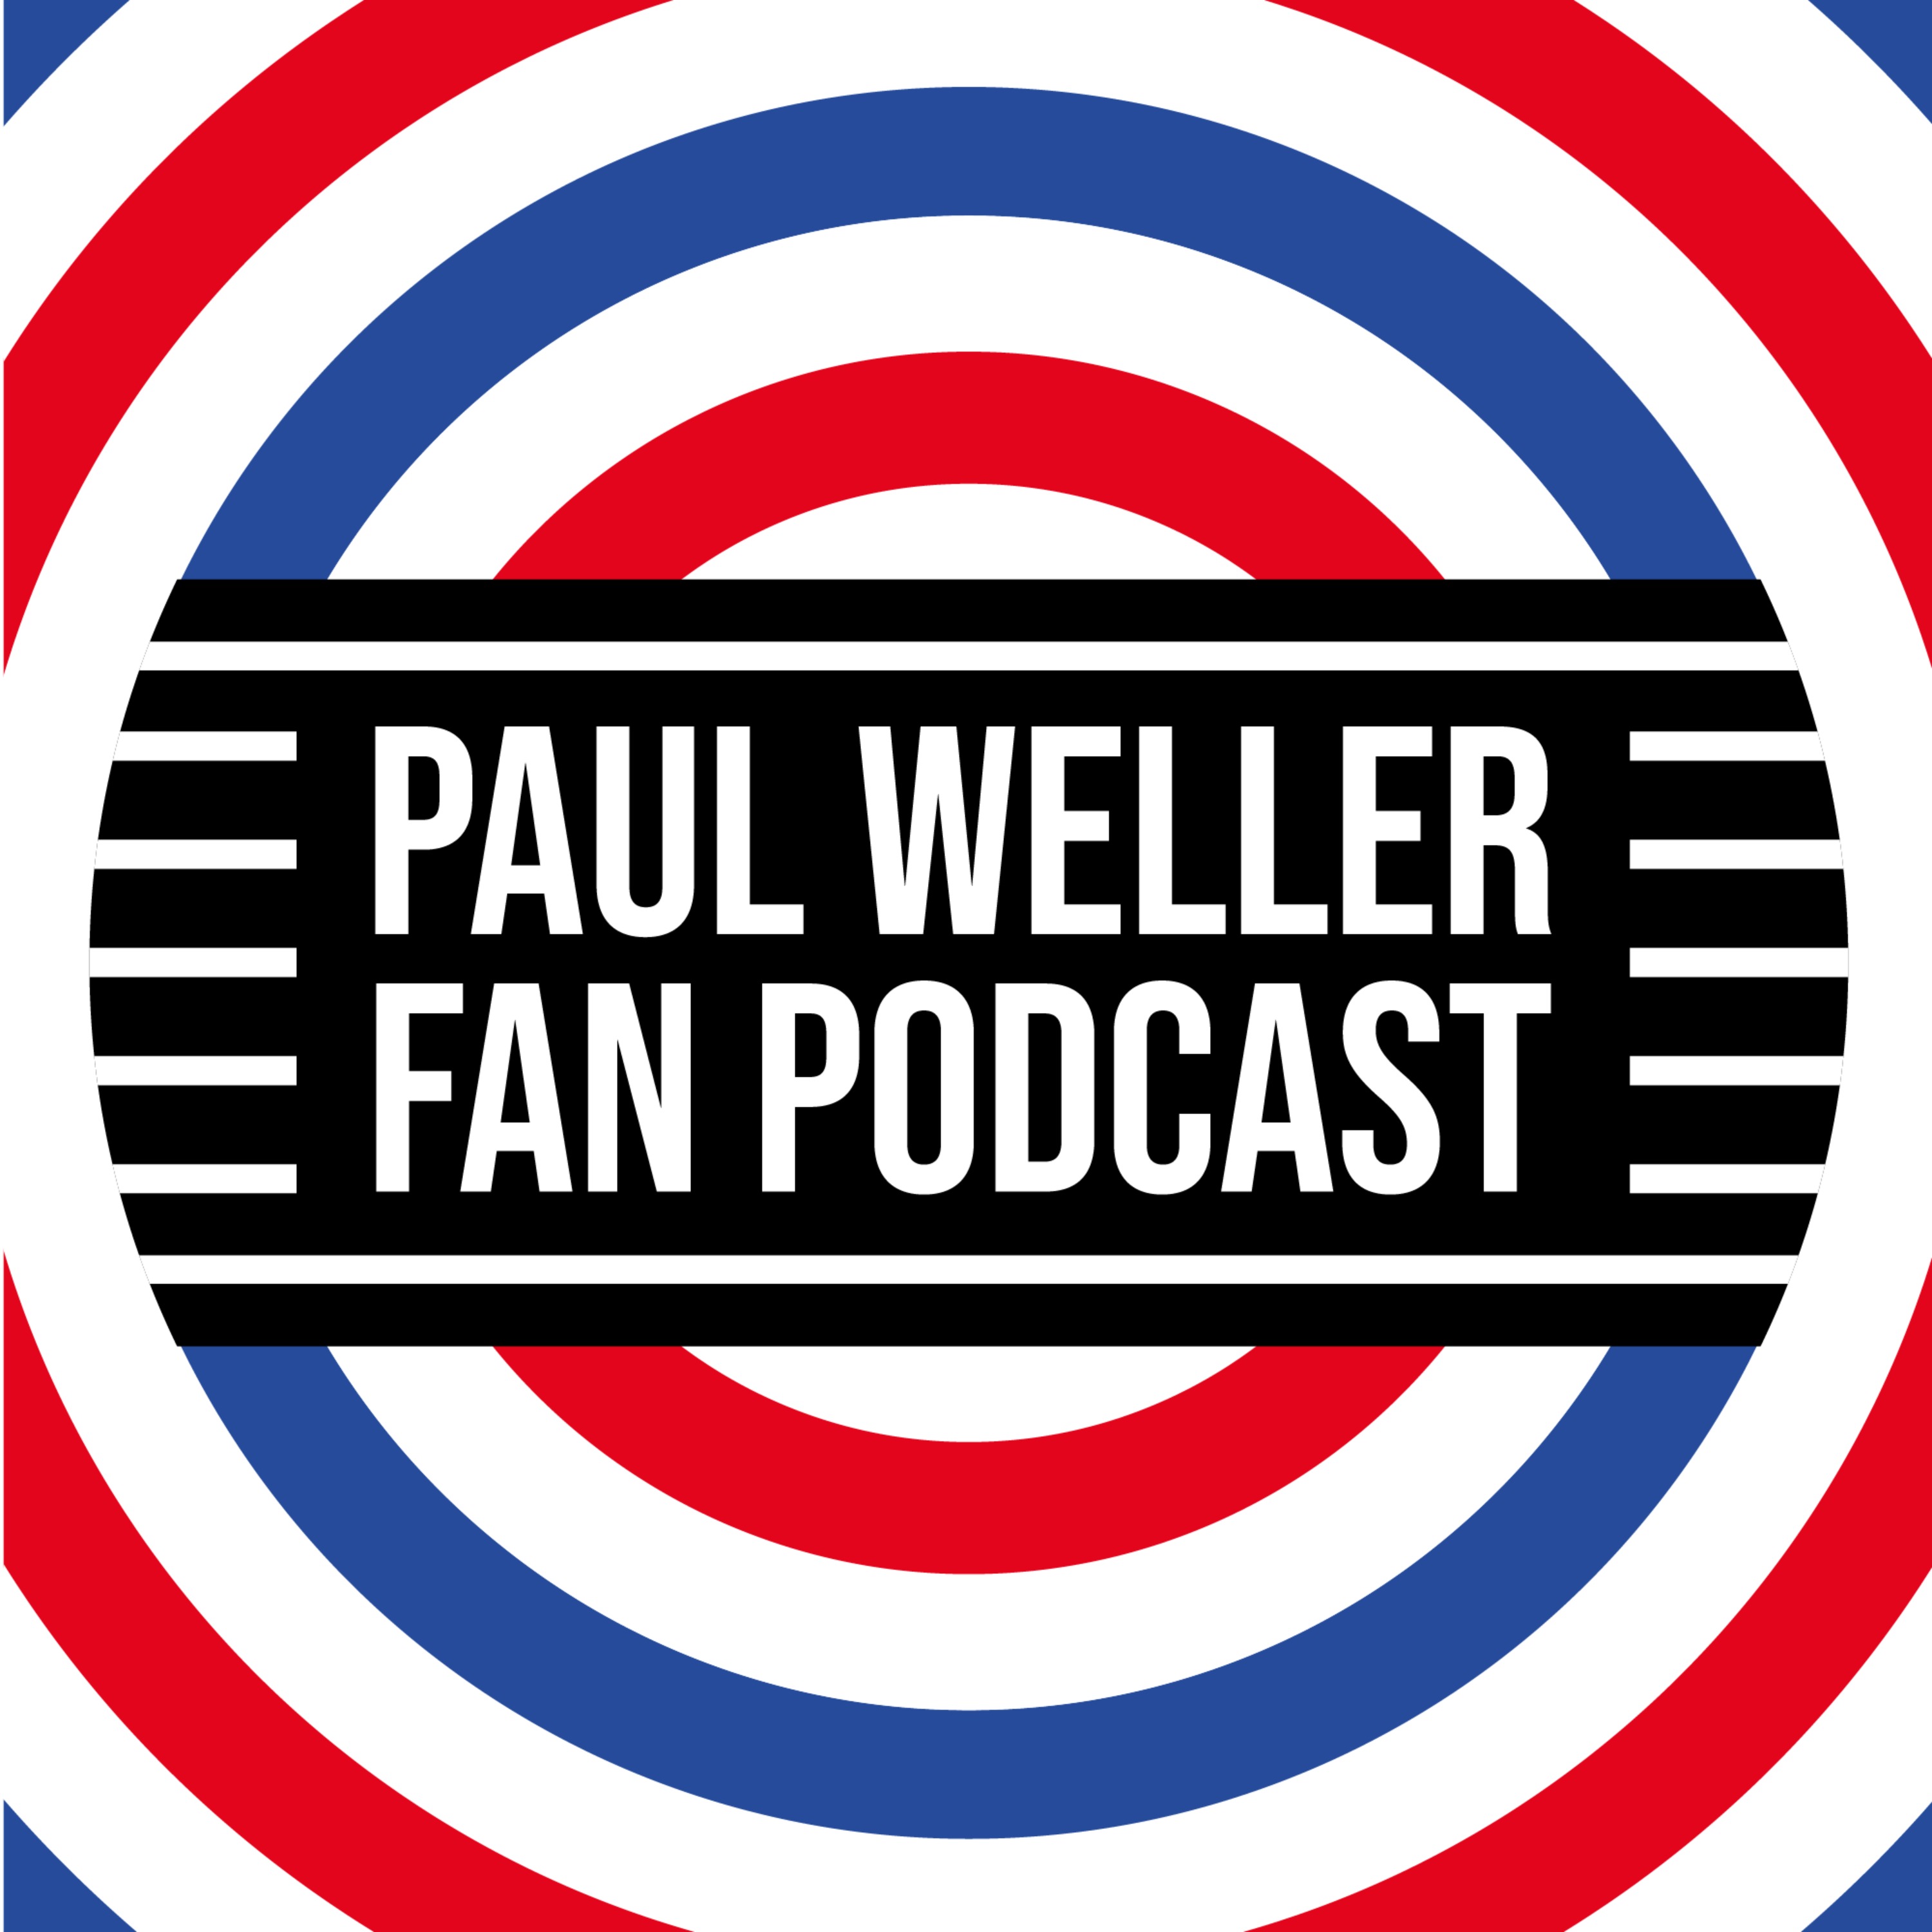 Paul Weller Fan Podcast podcast show image